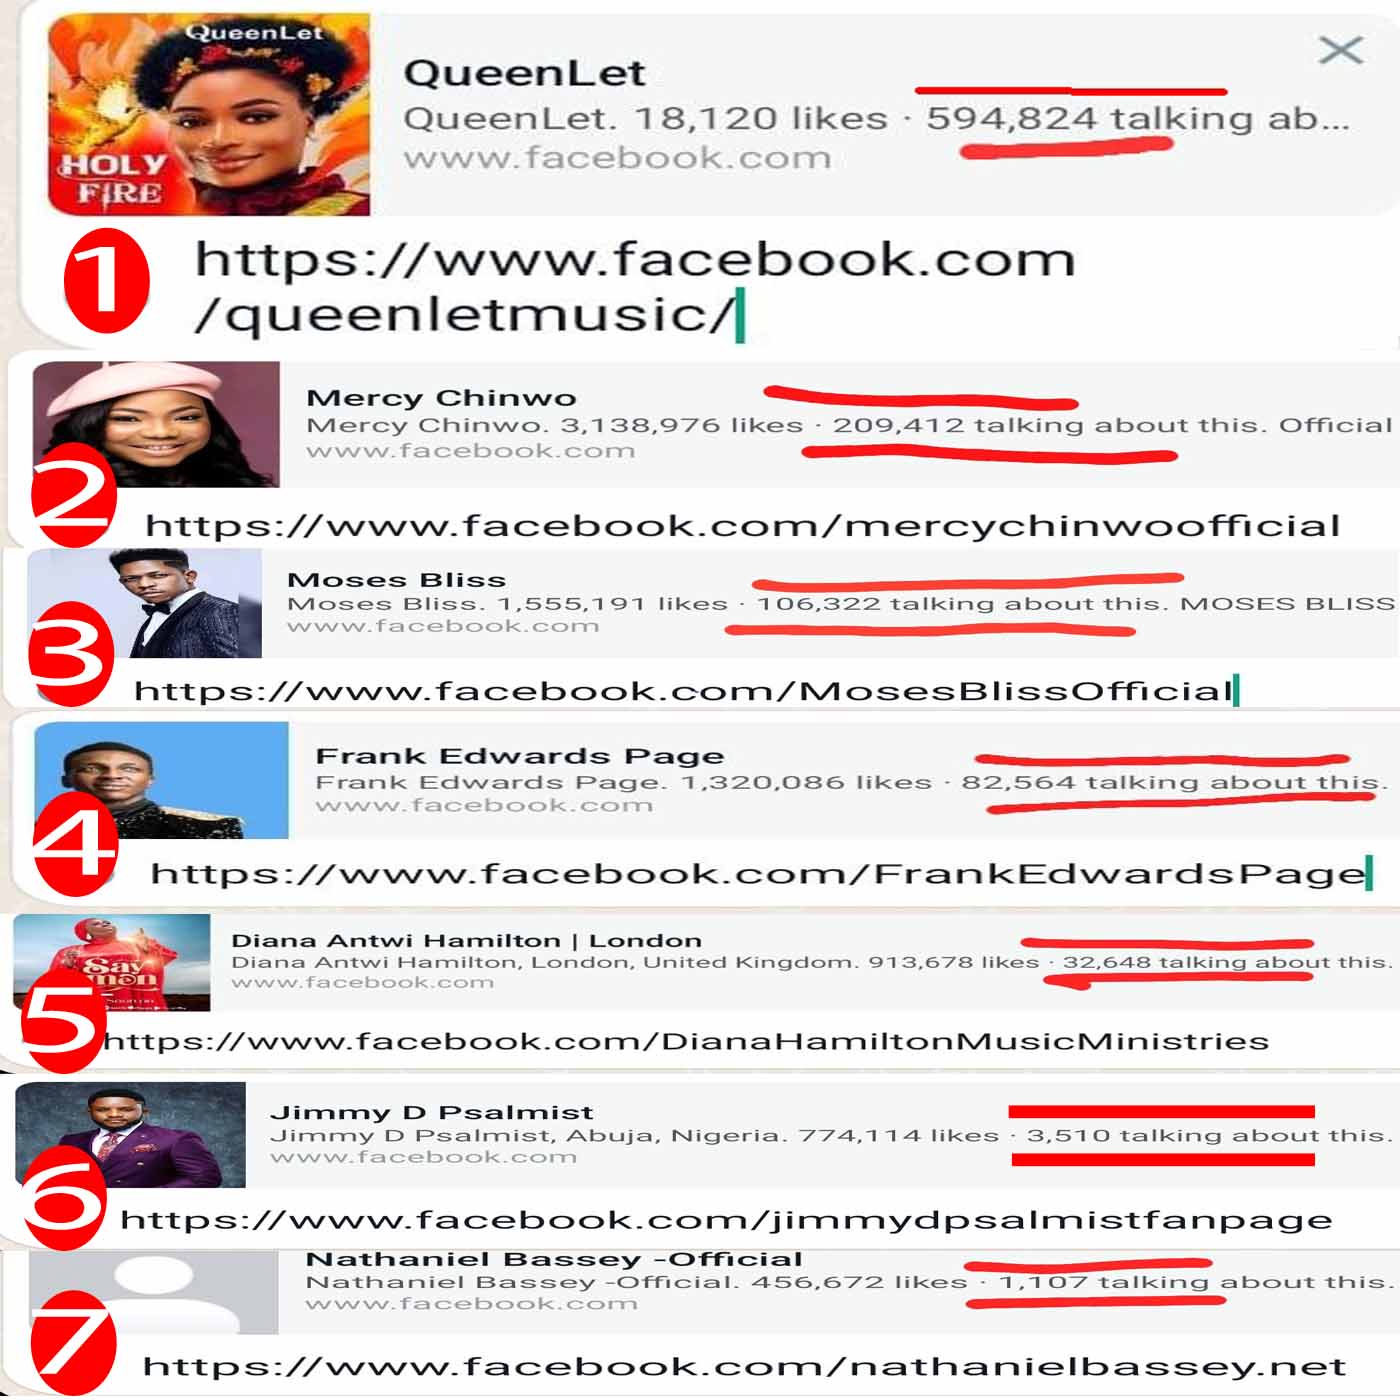 594k people talking about QueenLet On Facebook with 34k Followers.